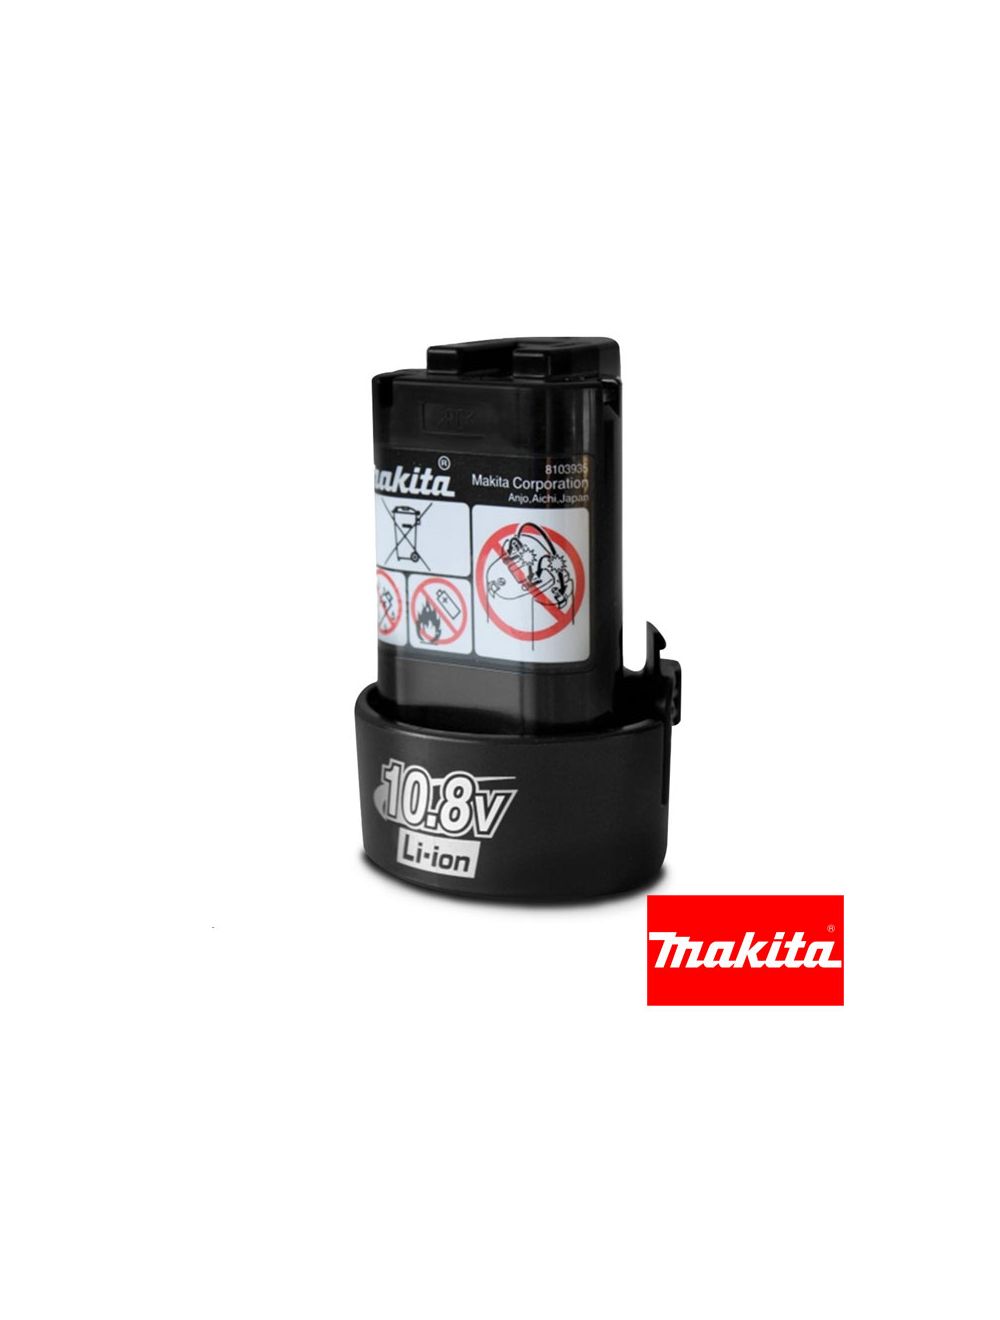 Makita - Product Details - BL1013 10.8V 1.3Ah Lithium-Ion battery